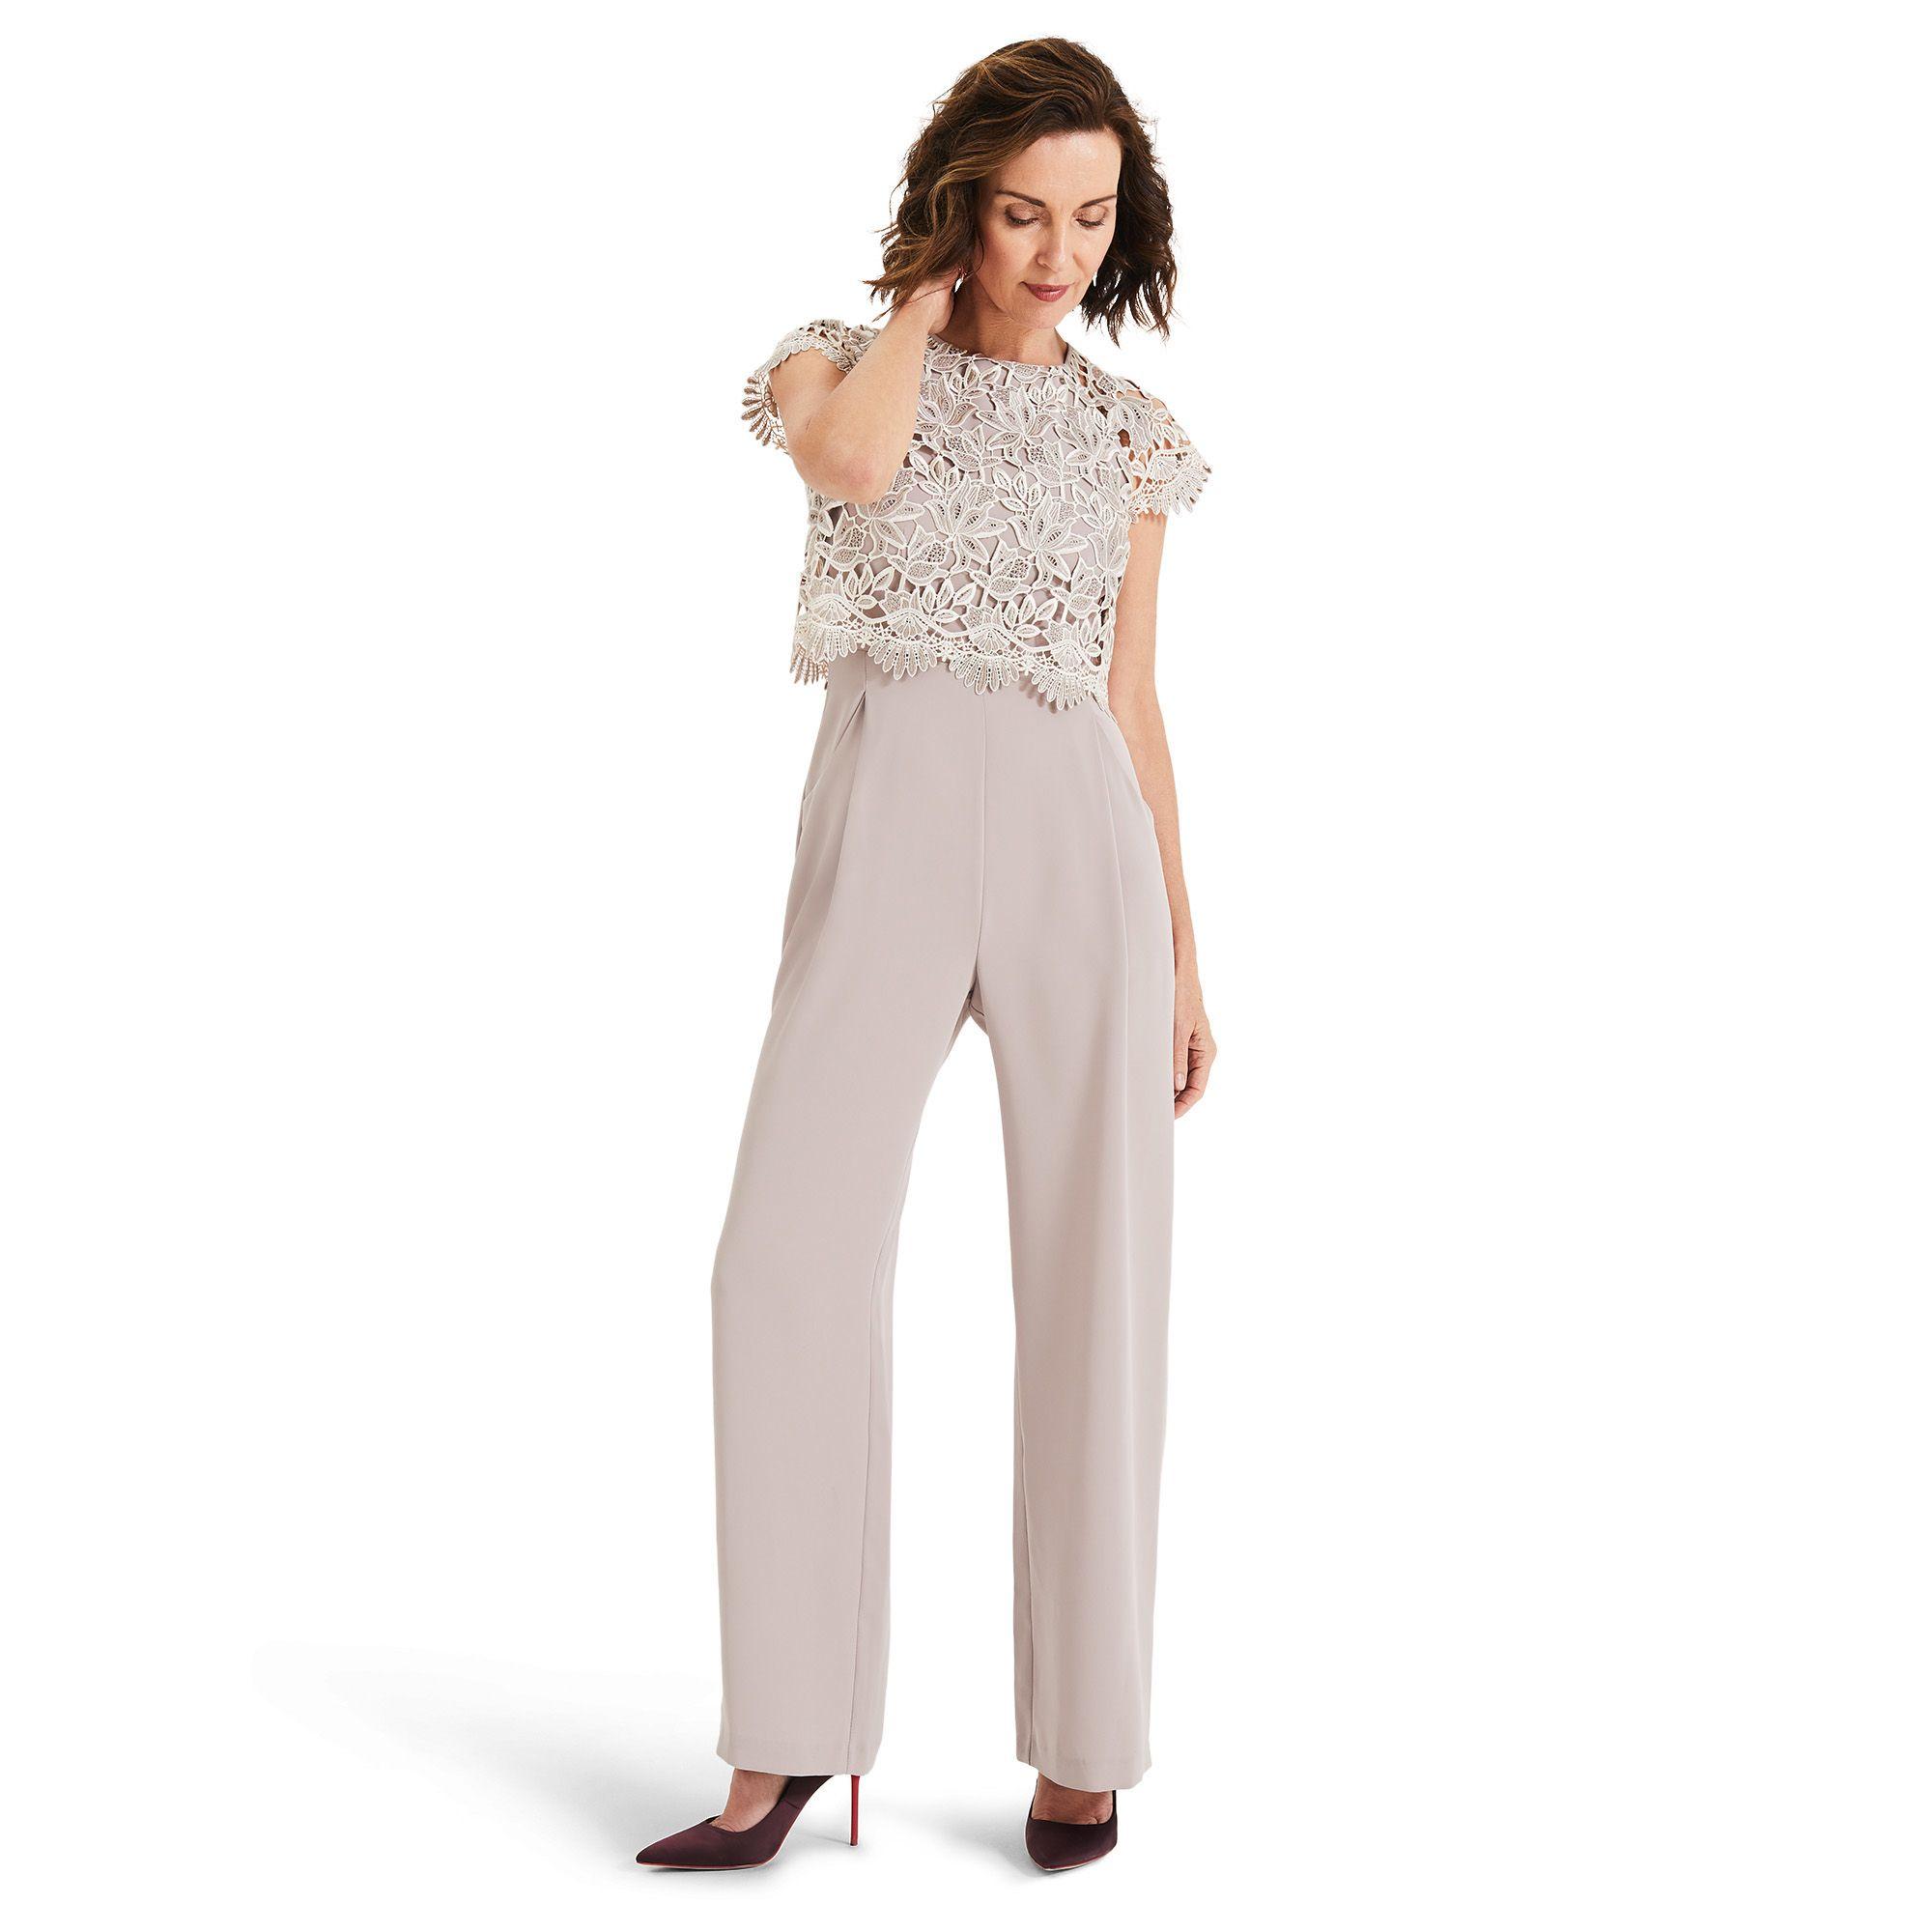 Phase Eight Cream Katy Lace Jumpsuit in Natural - Save 20% - Lyst